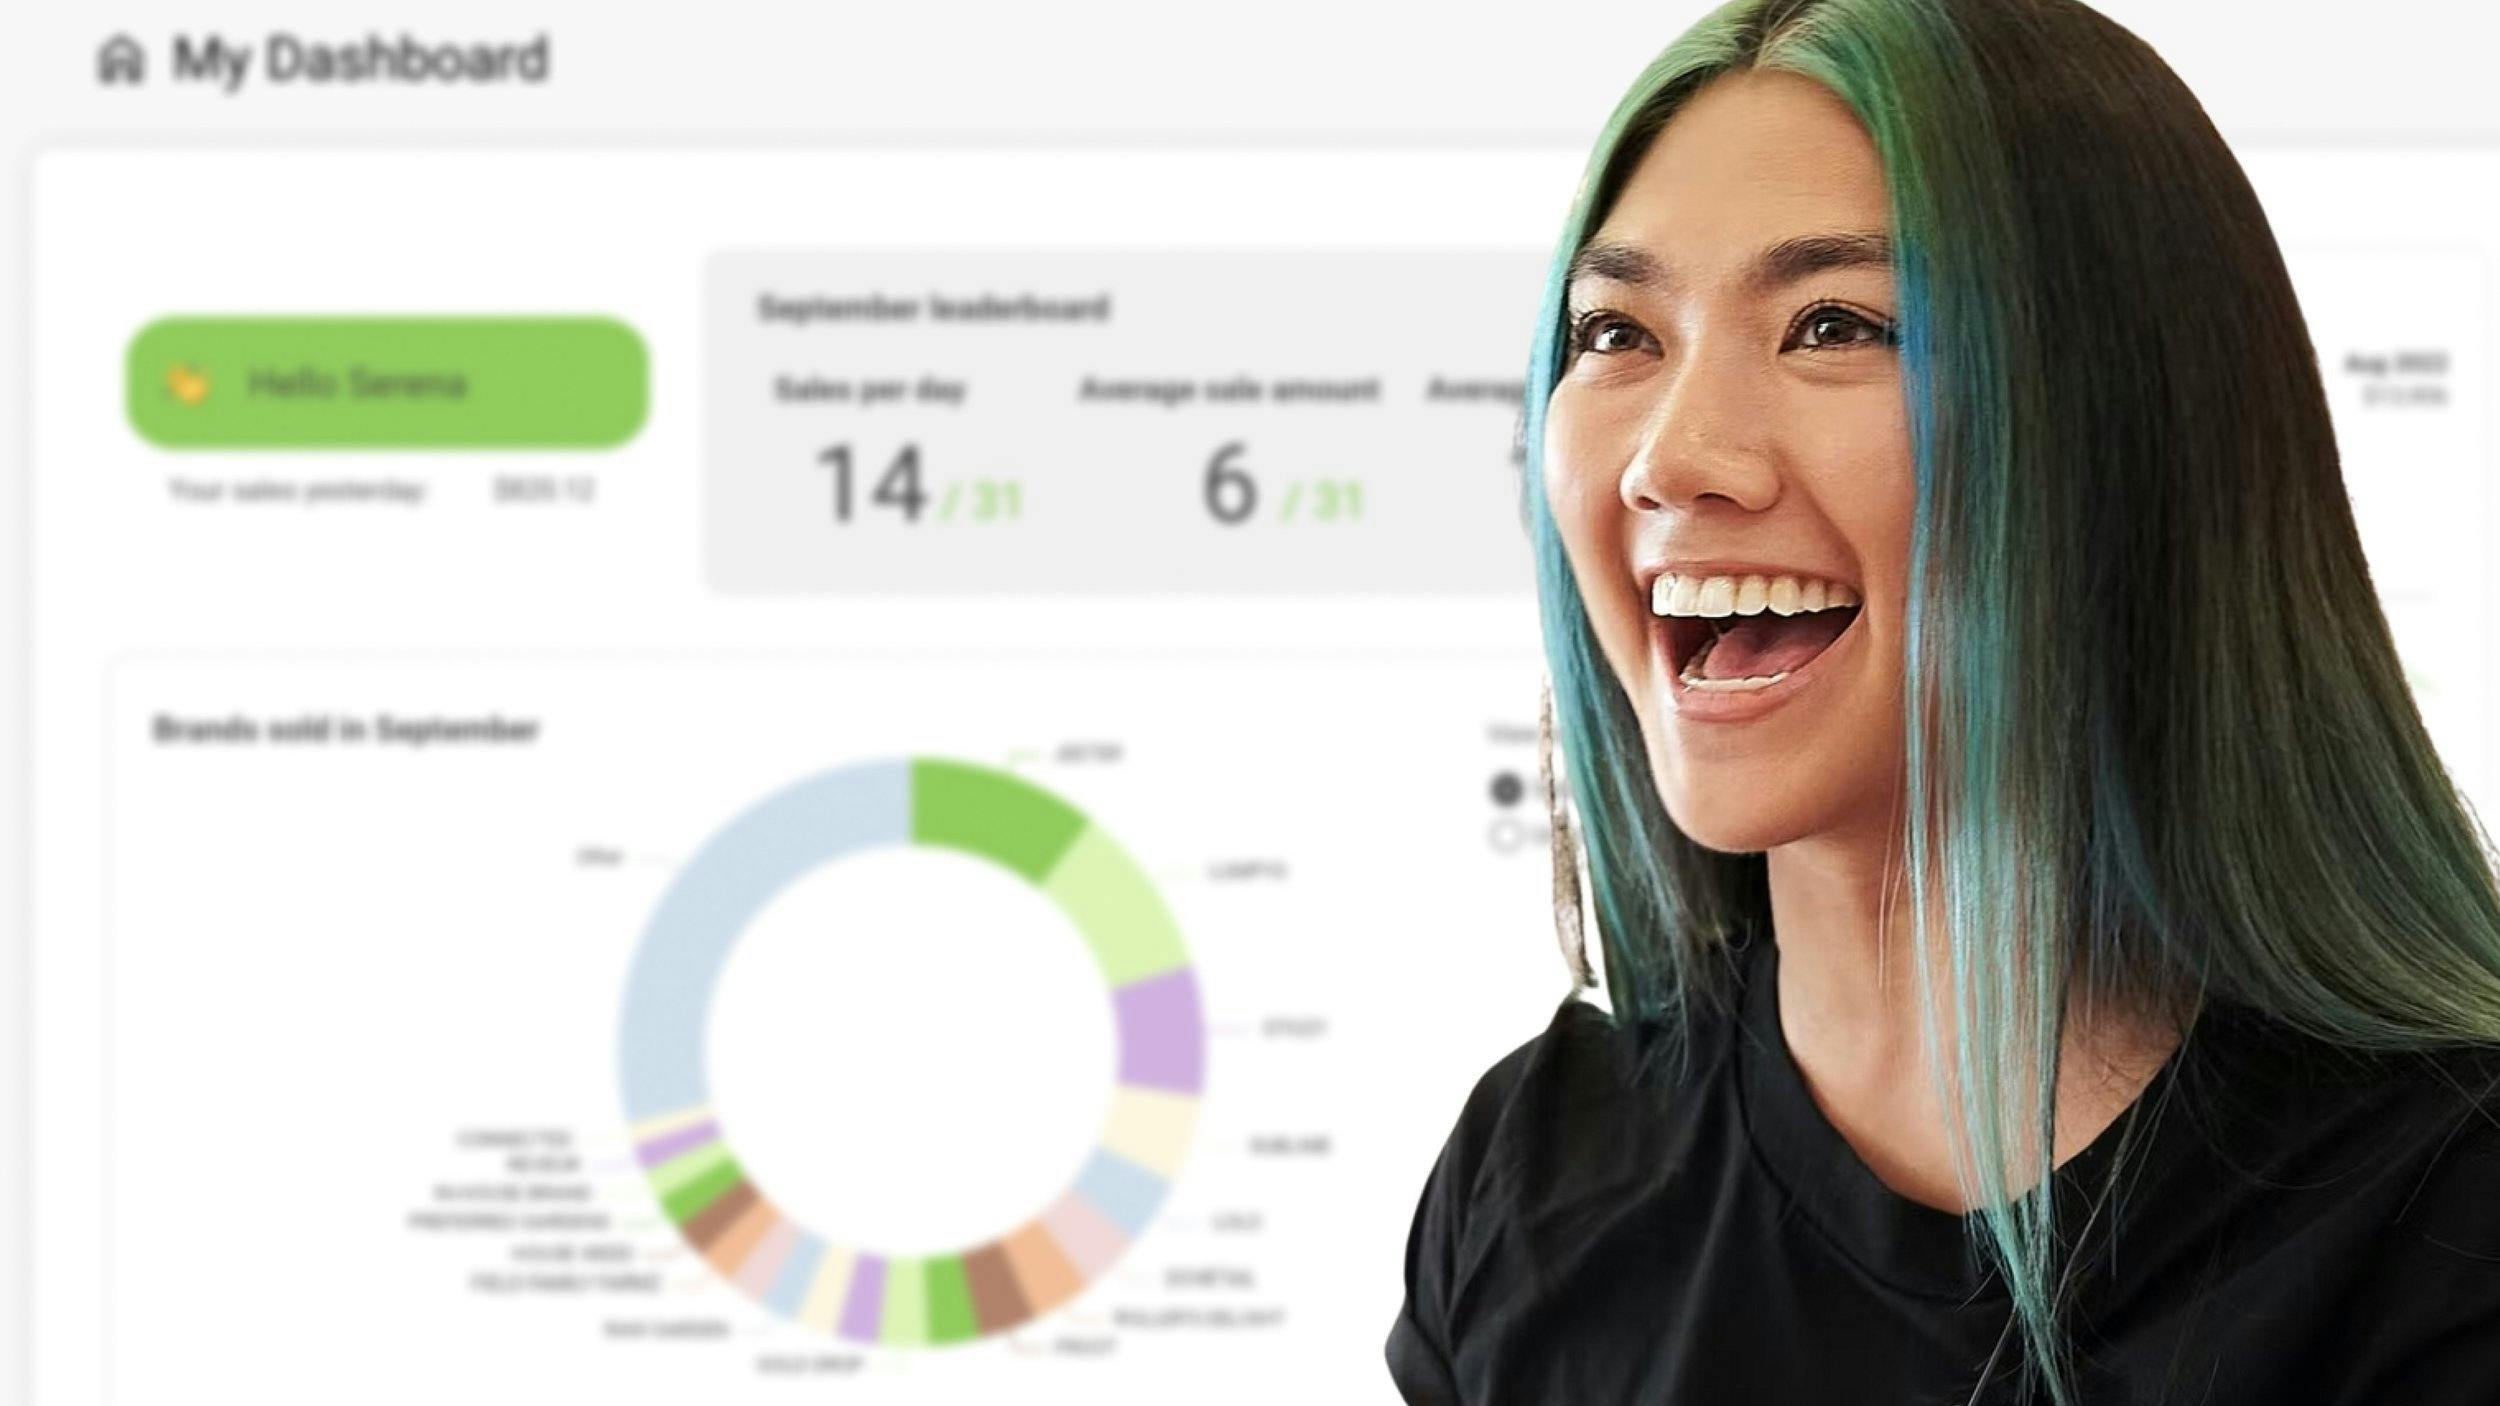 A smiling blue haired person is superimposed over a dashboard illustration of Retail Analytics by Treez. A colorful wheel is shown with brand names as "brands sold in September"